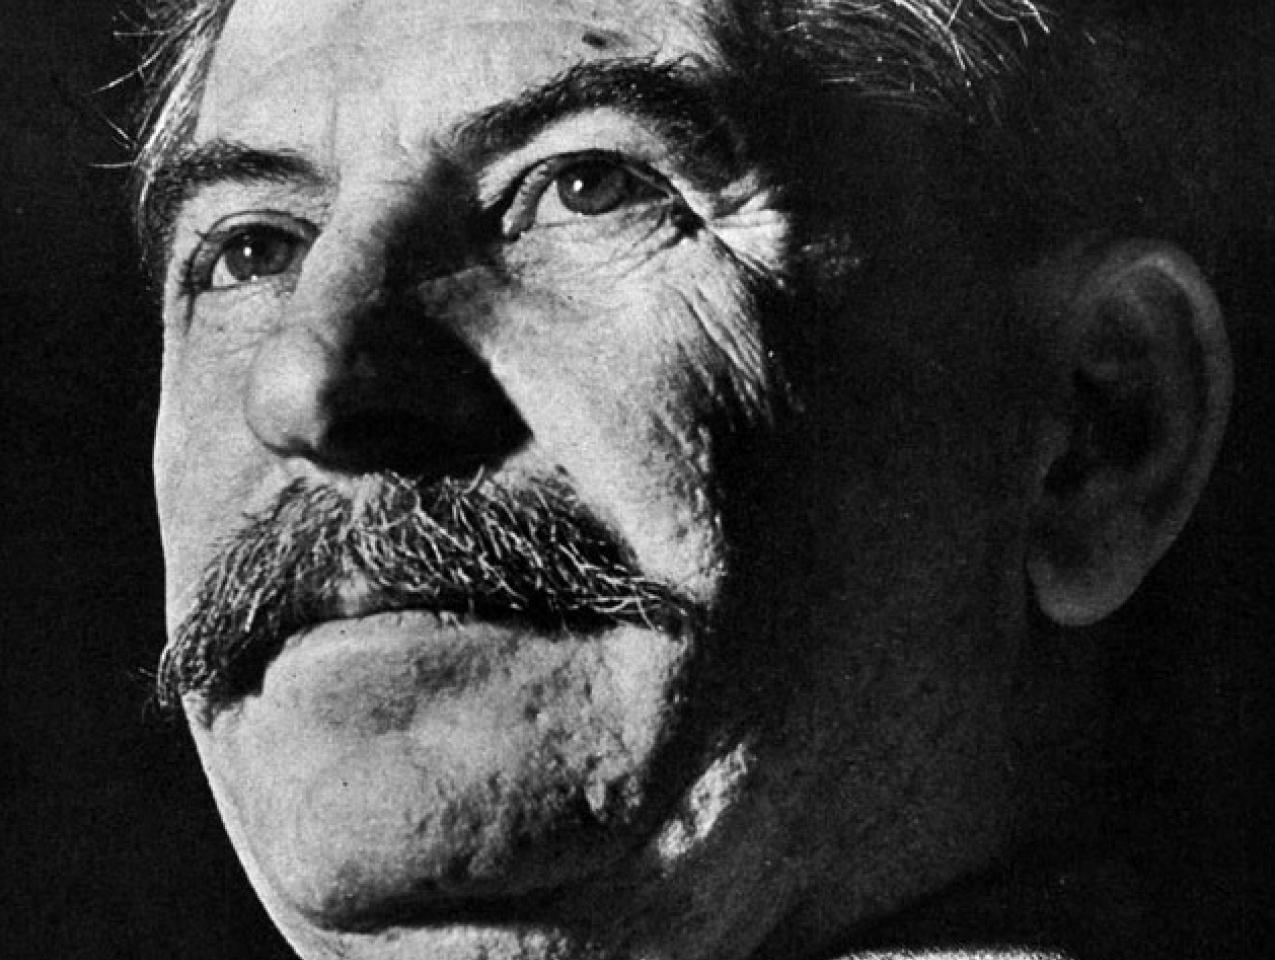 Photographic portrait of the “Great and Generous Leader,” Joseph Stalin.